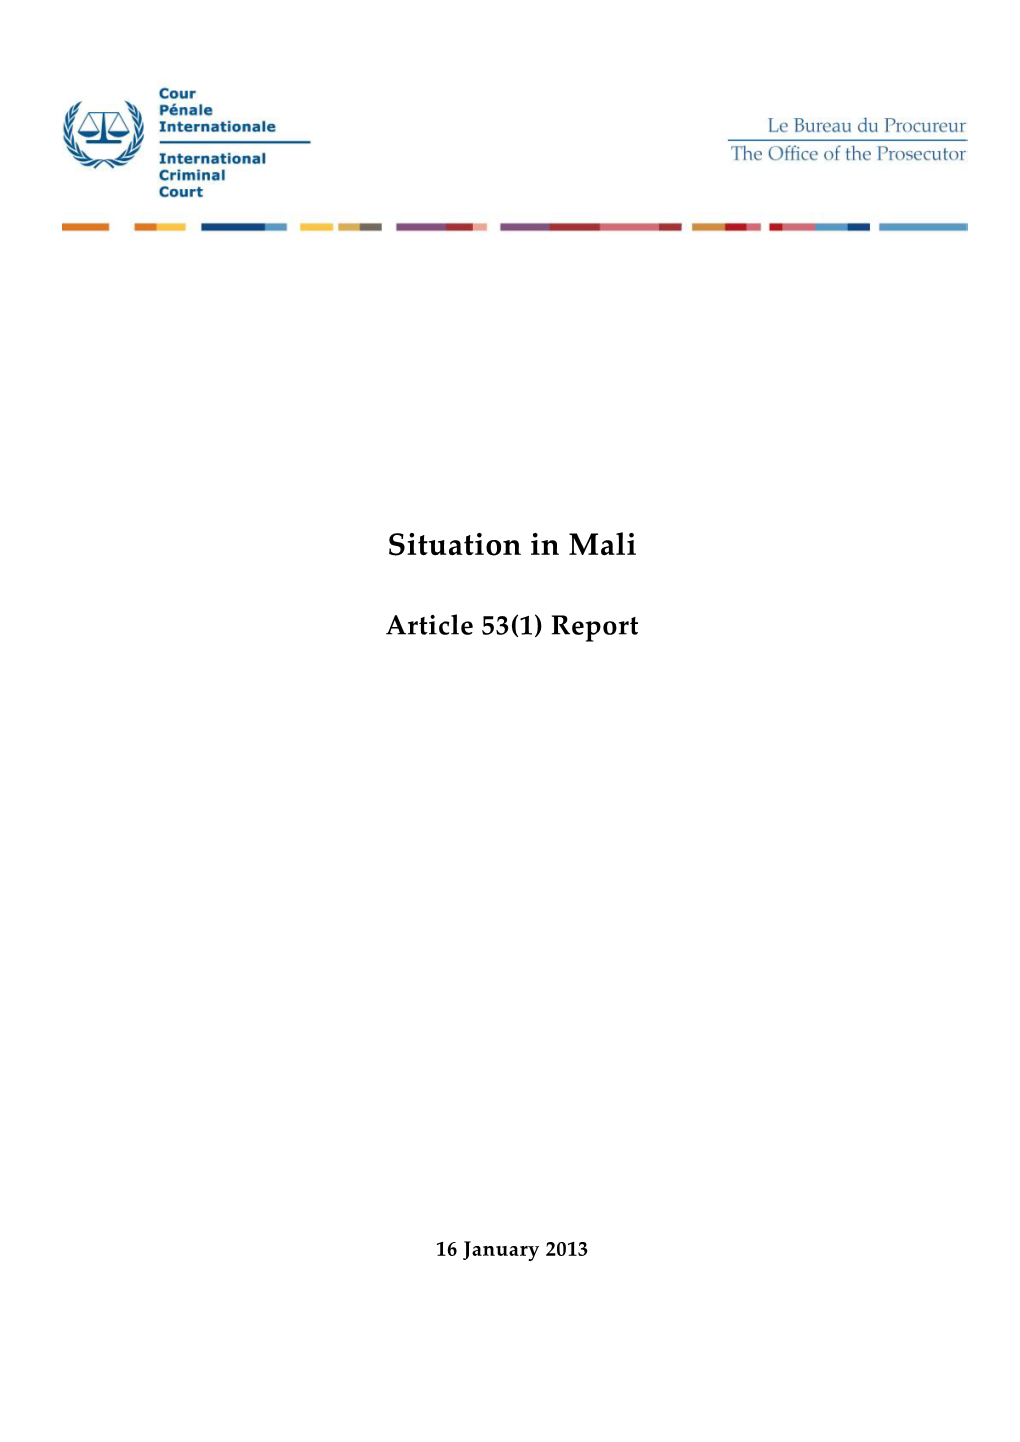 Situation in Mali: Article 53(1) Report